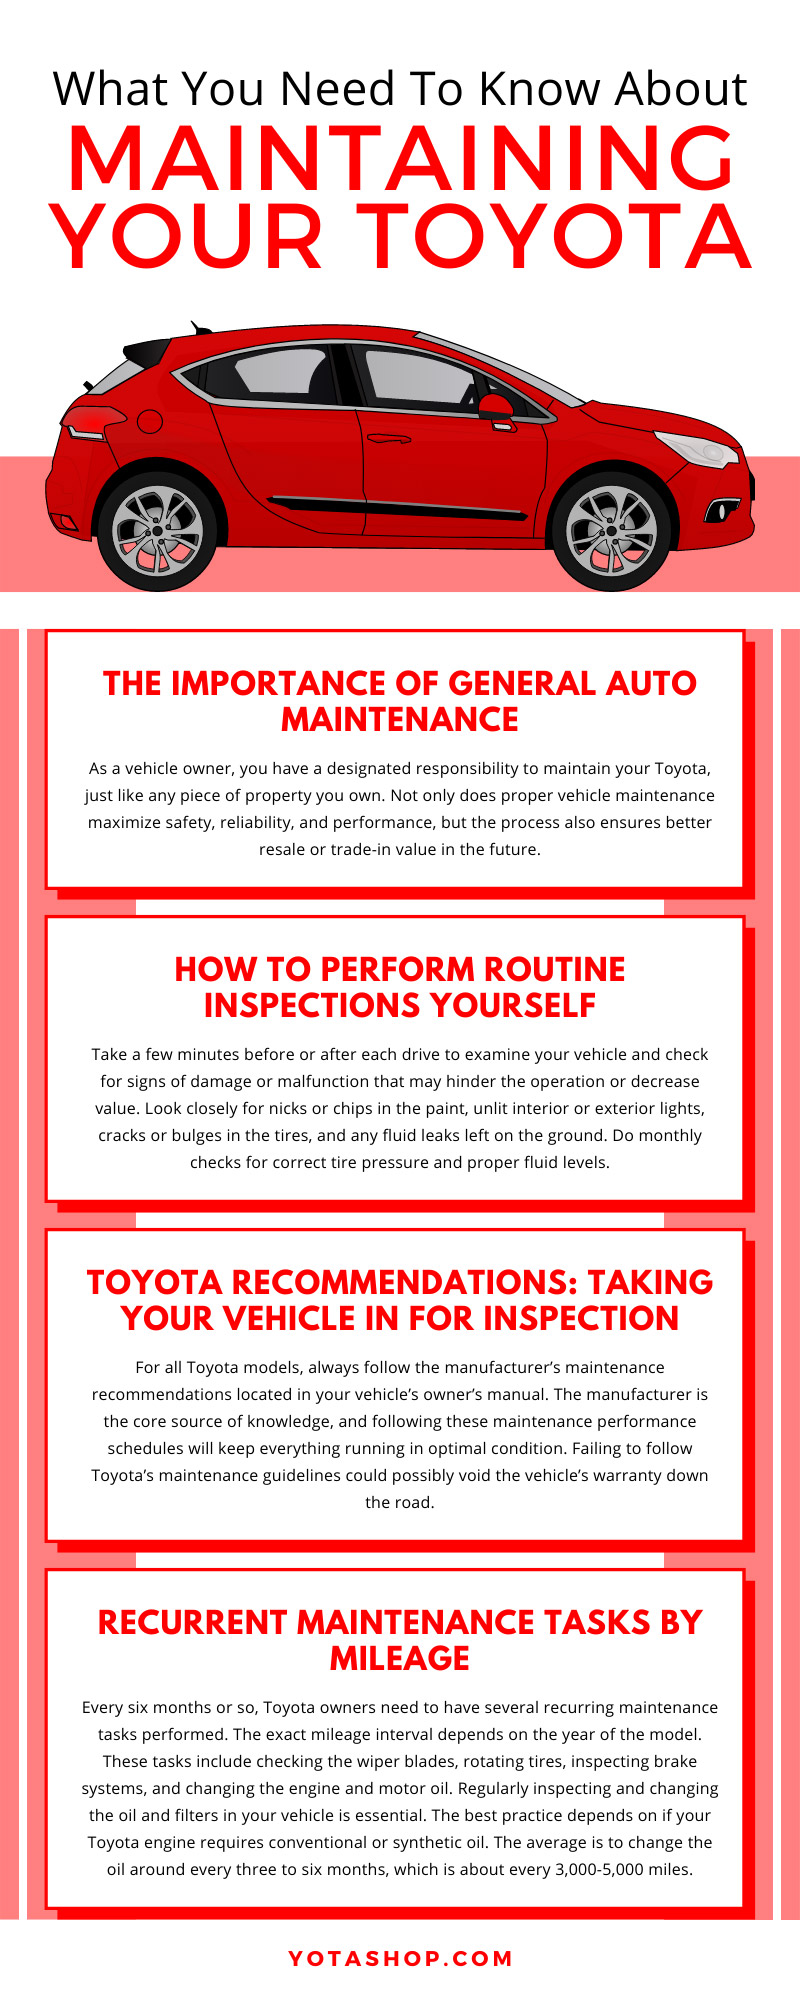 What You Need To Know About Maintaining Your Toyota